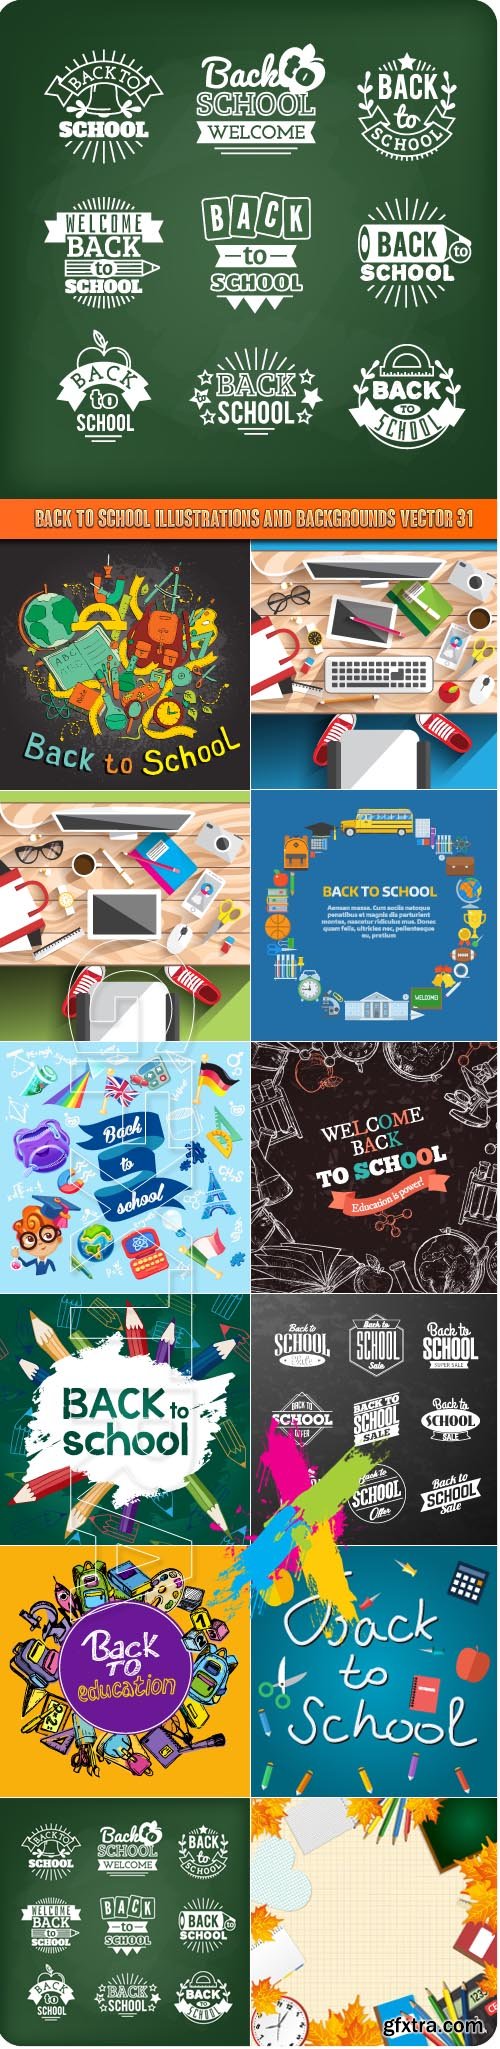 Back to school illustrations and backgrounds vector 31